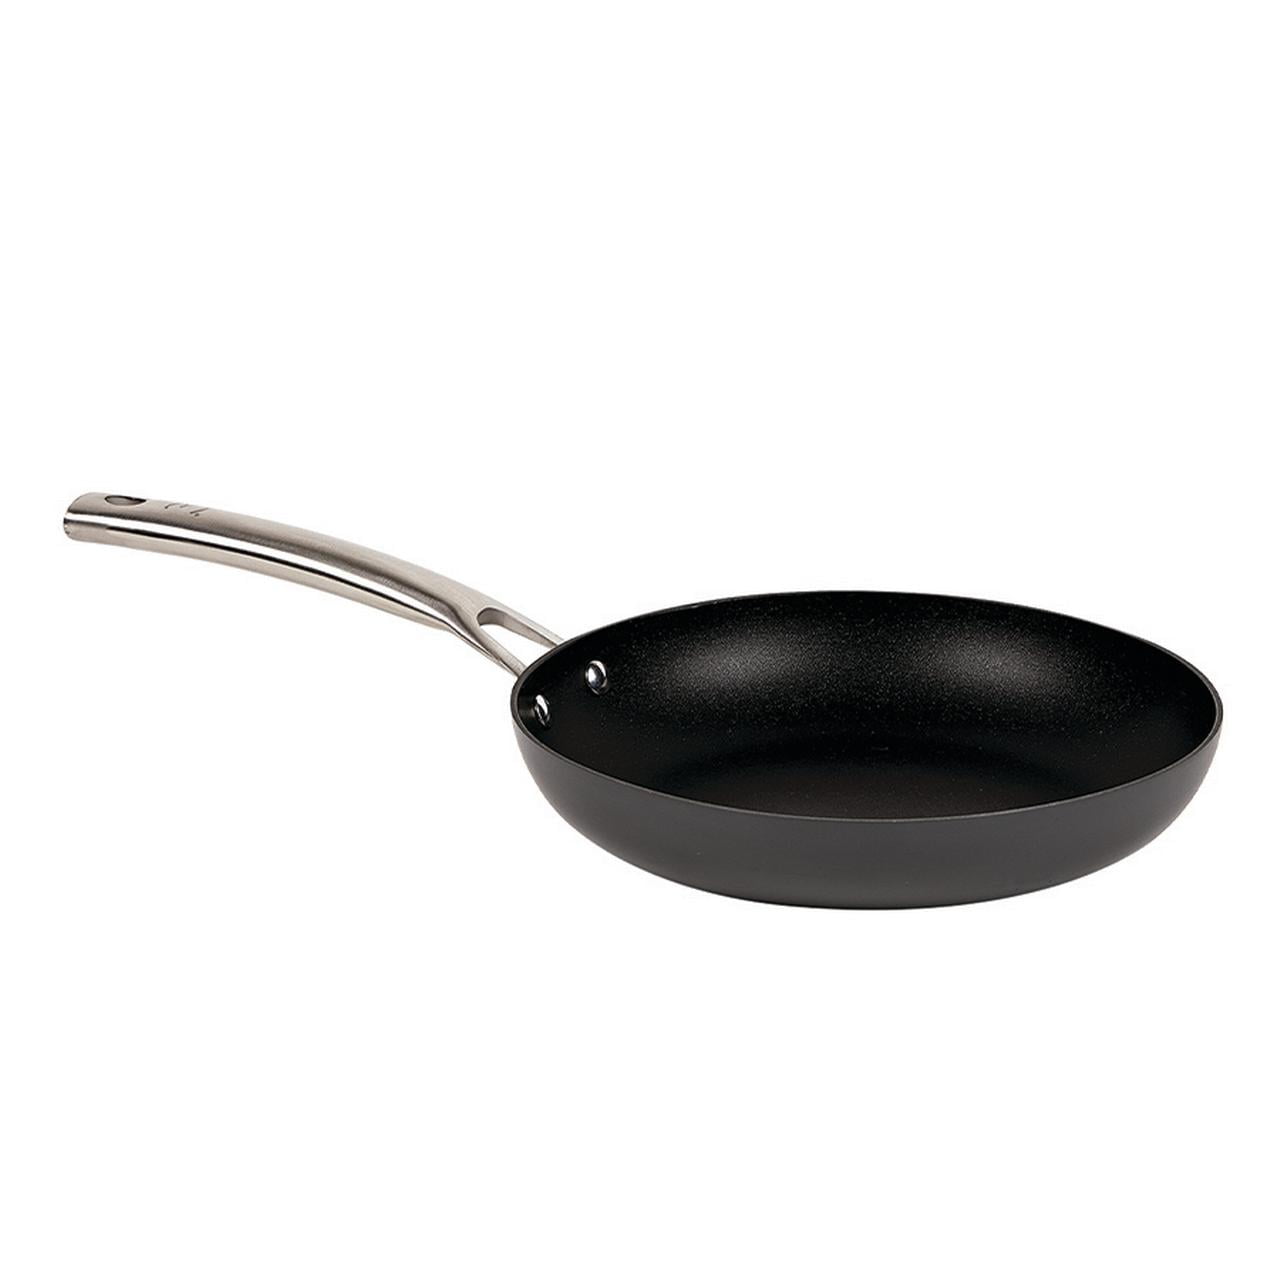 Emura Pan Review: Is It Legit? Non-Stick Cooking Pan for Home